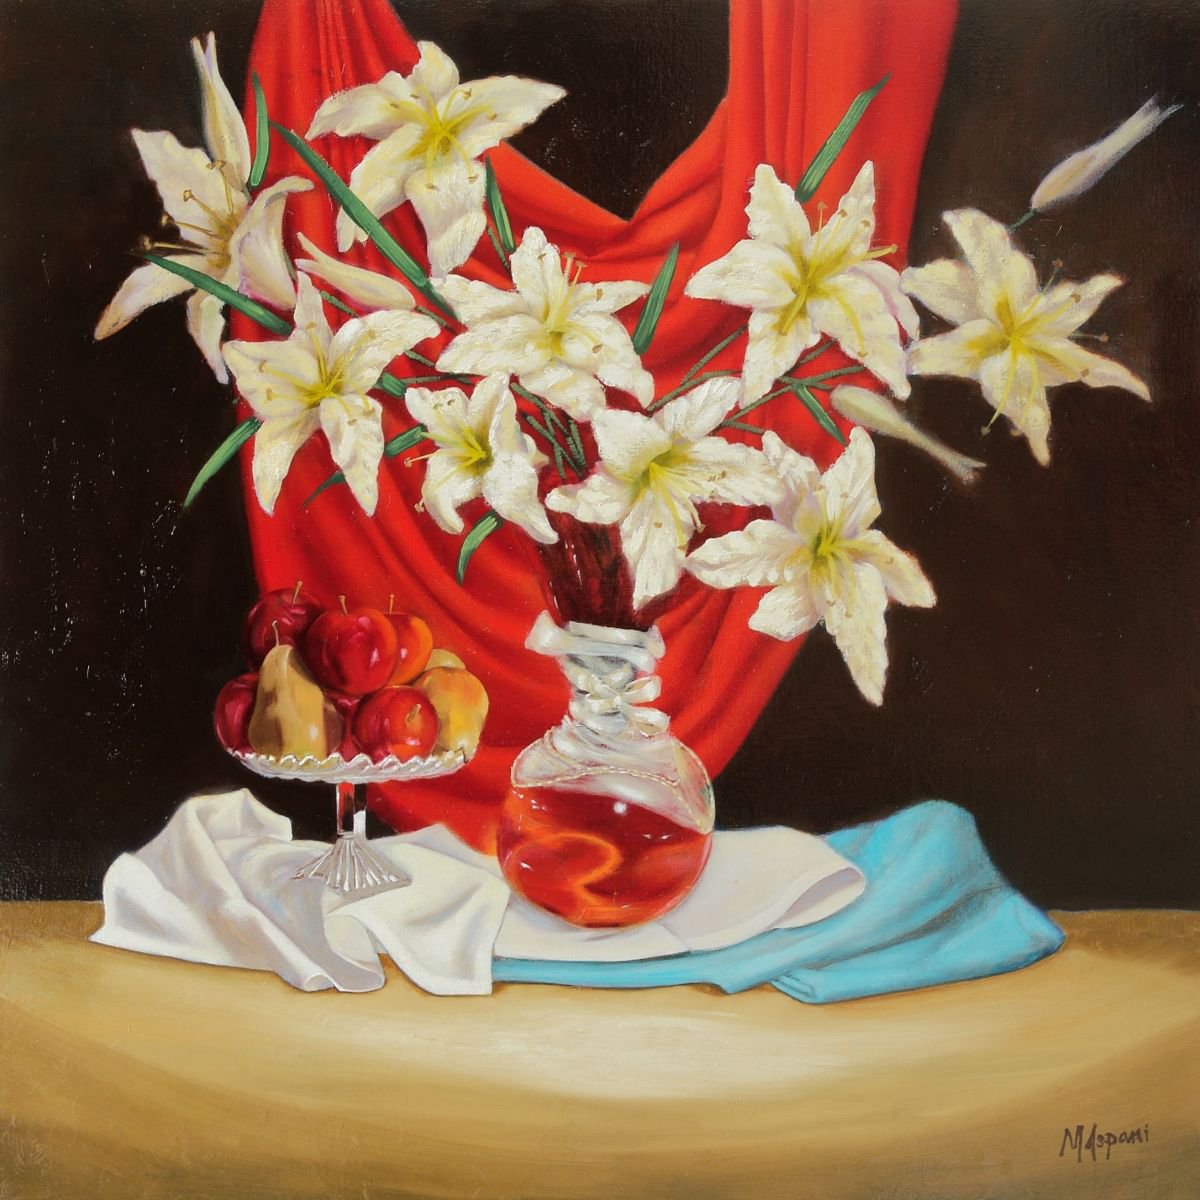 Lillies with fruit & red velvet by mauro ispani